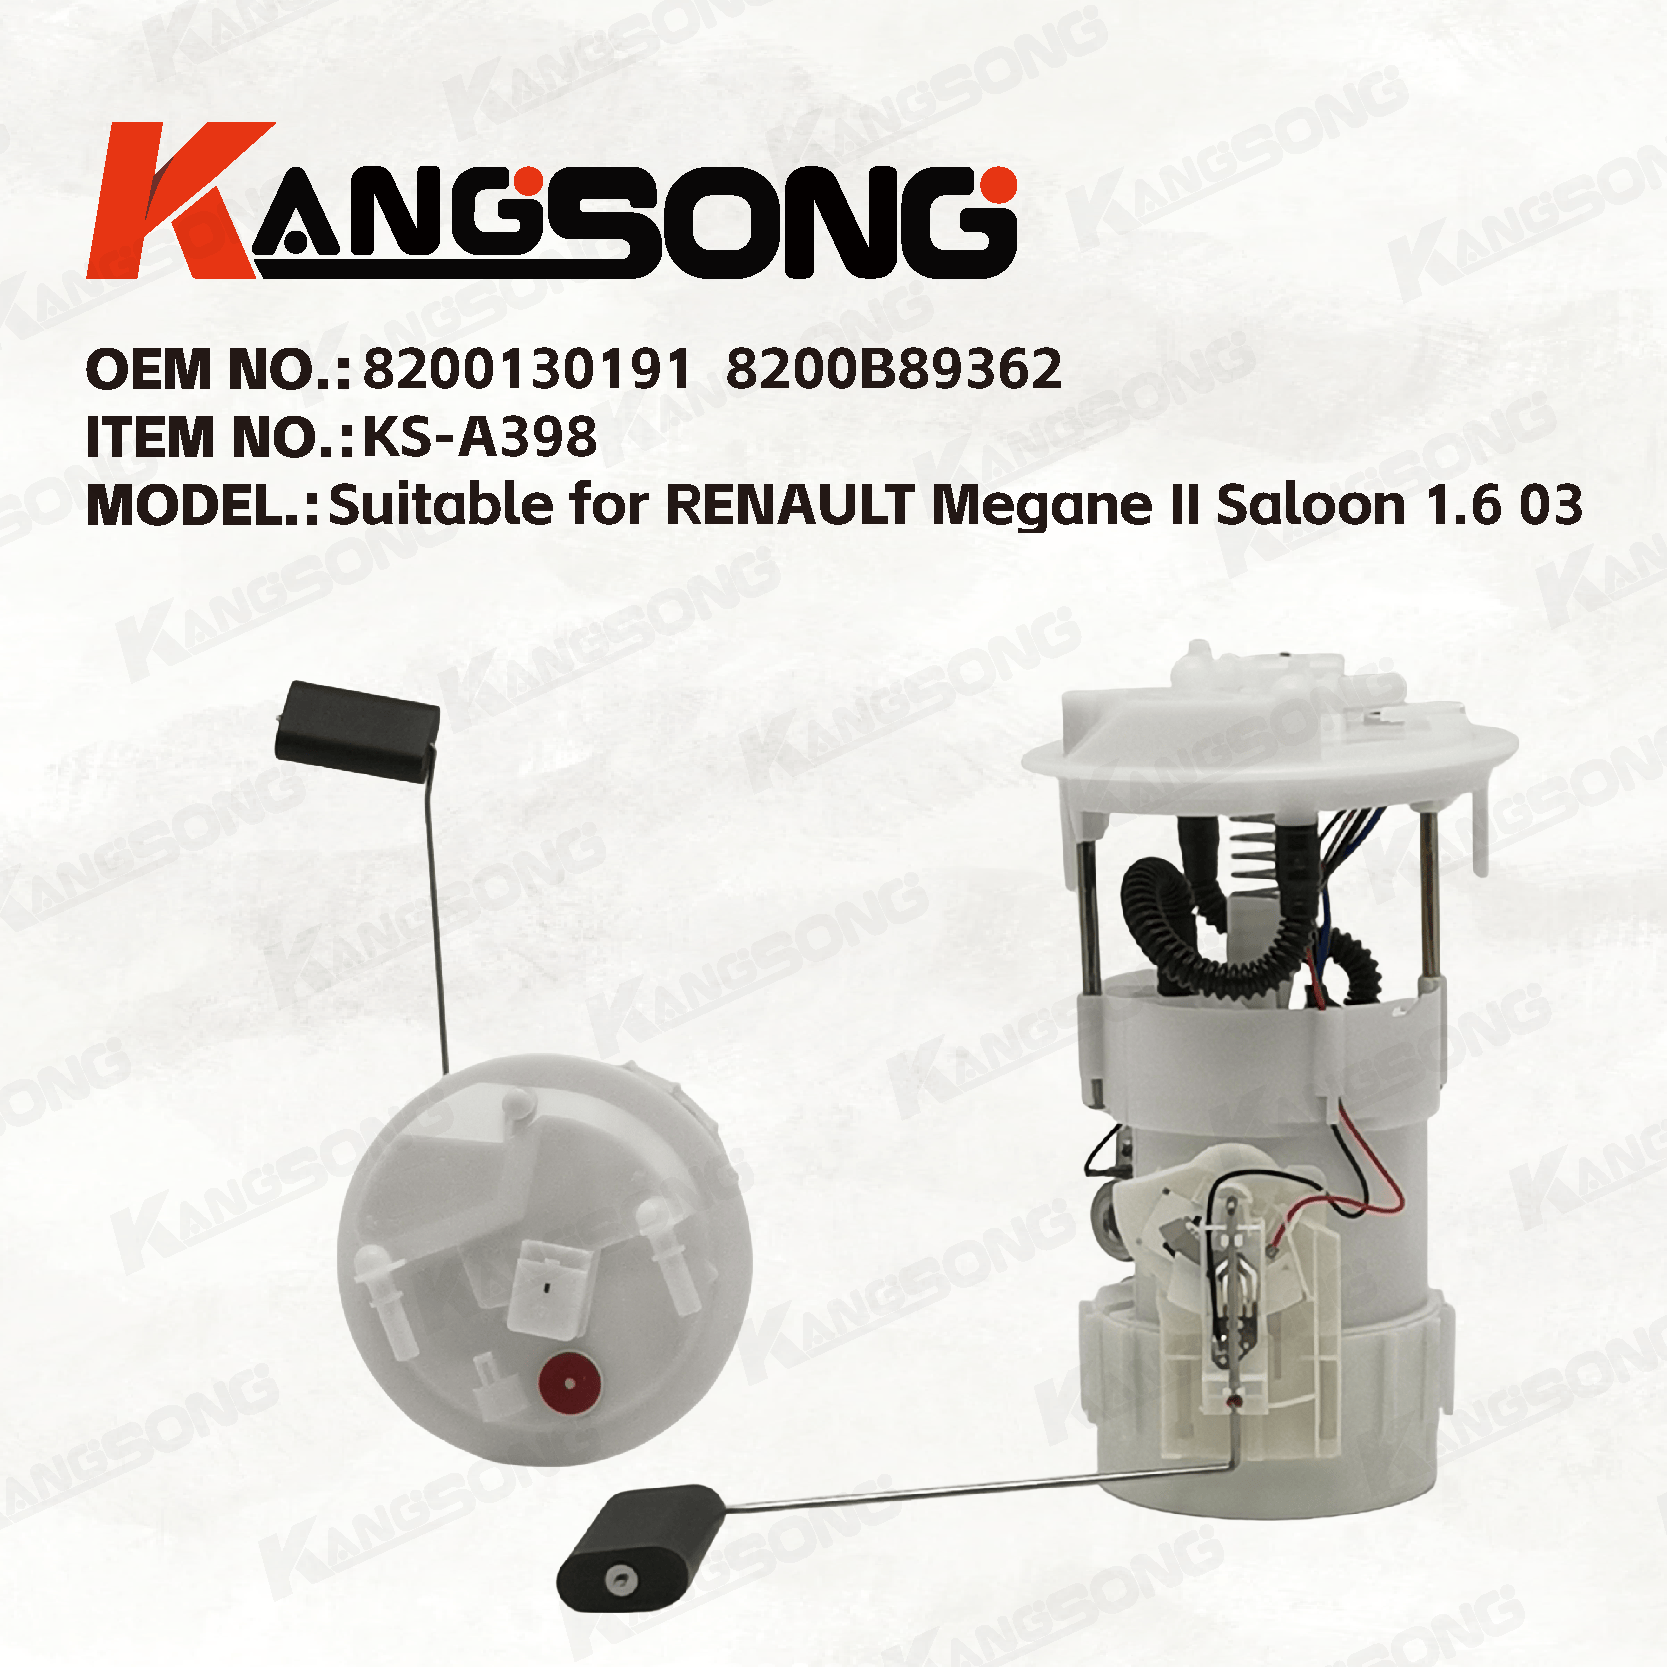 Applicable to RENAULT Megane II Saloon 1.6 03  /8200130191,8200B89362 /Fuel Pump Assembly /KS-A398